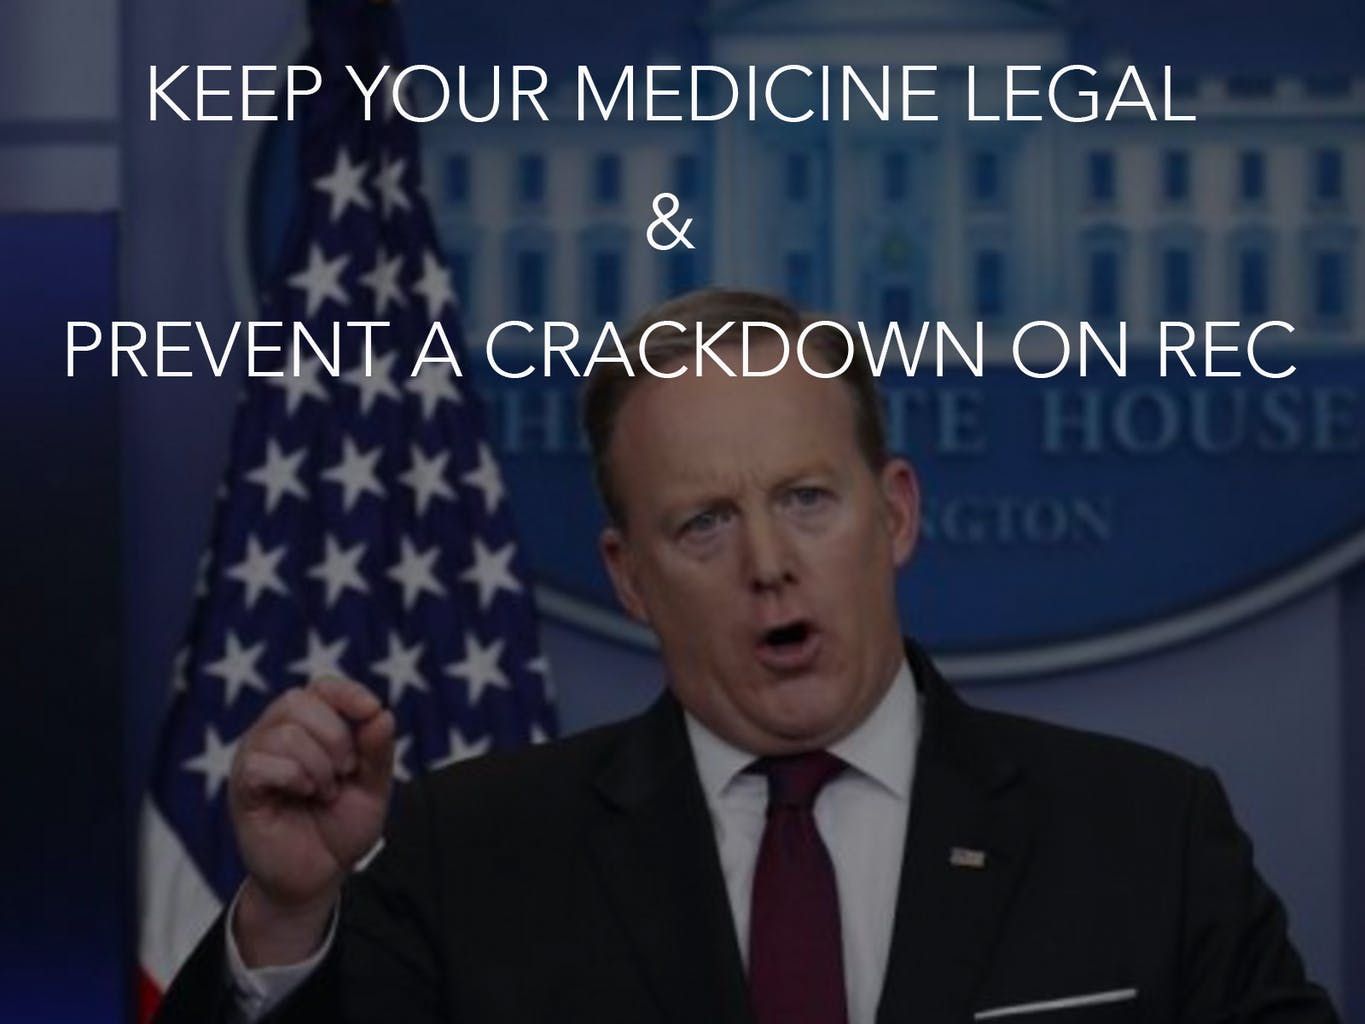 keep_your_medicine_legal_and_prevent_a_crackdown_on_rec_6d9fc0adef